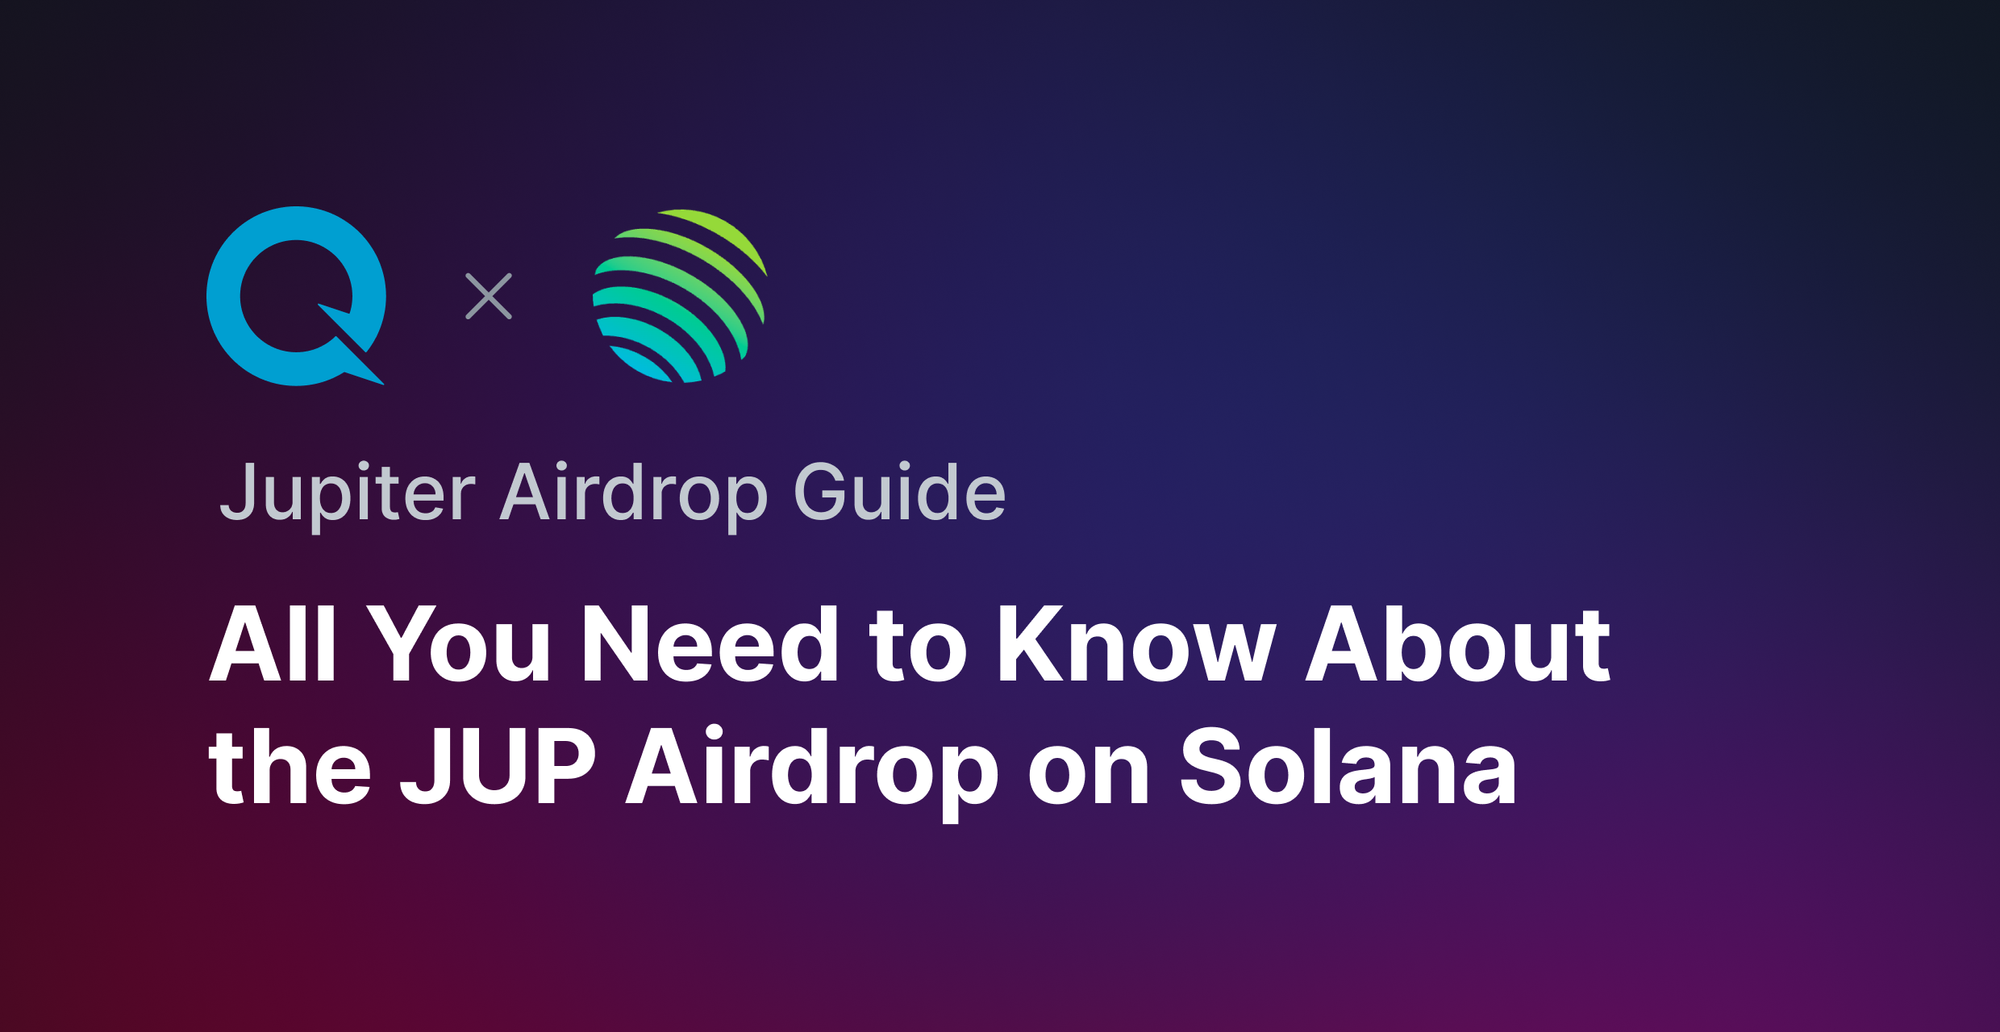 Jupiter Airdrop Guide: All You Need to Know About the JUP Airdrop on Solana